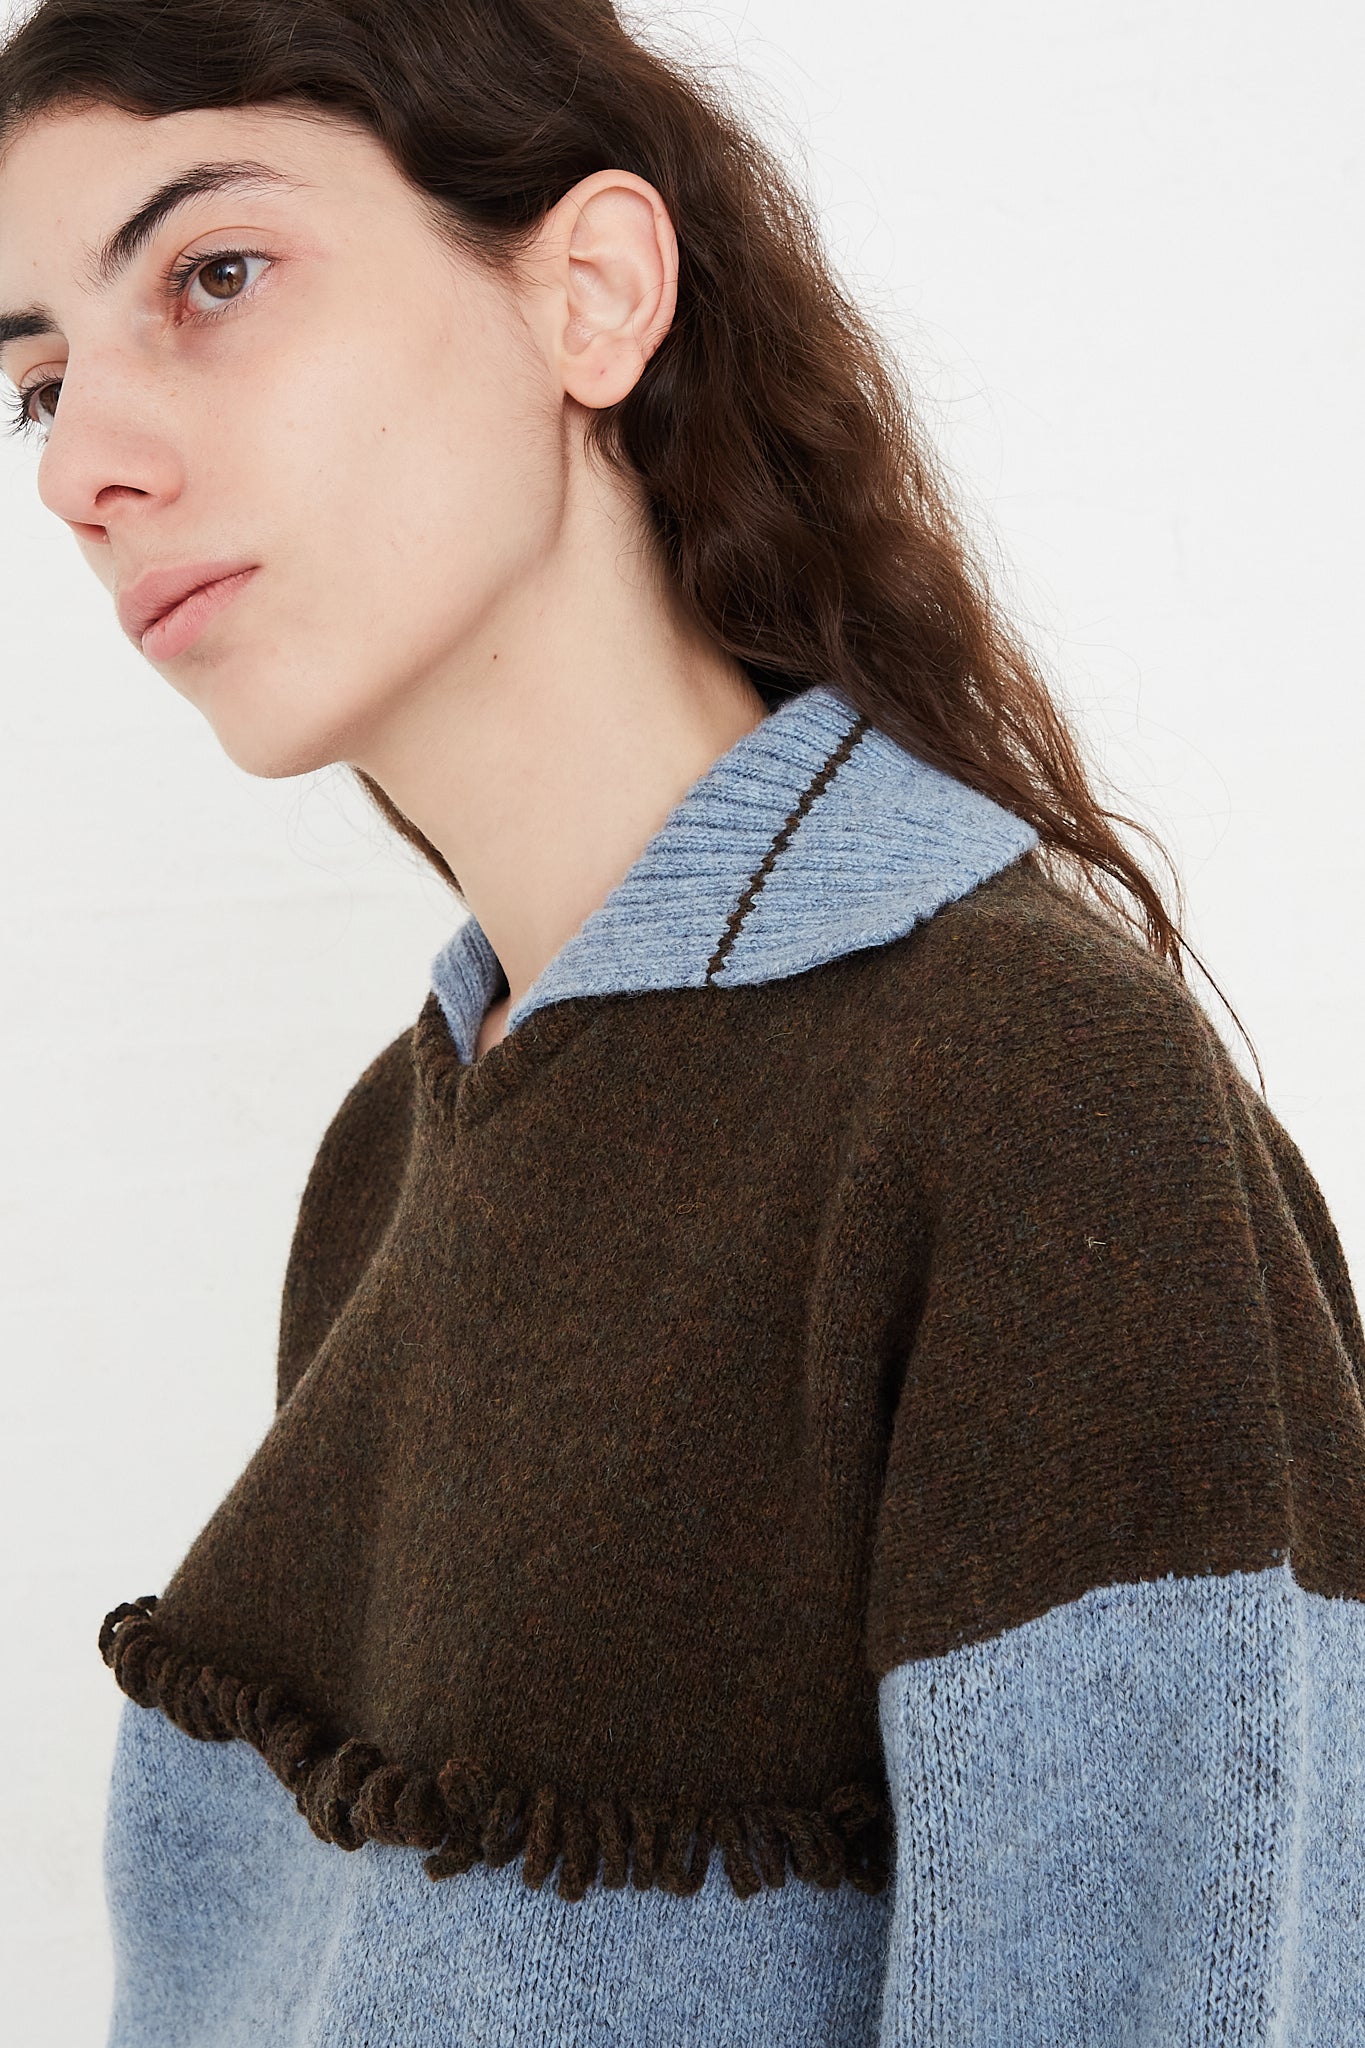 A model wearing a knit pullover sweater in a British wool. Features a polo collar with dropped shoulders and contrast color on top, cuffs and hem. Side view and up close. Showcasing sweater details. Designed by Cawley - Oroboro Store